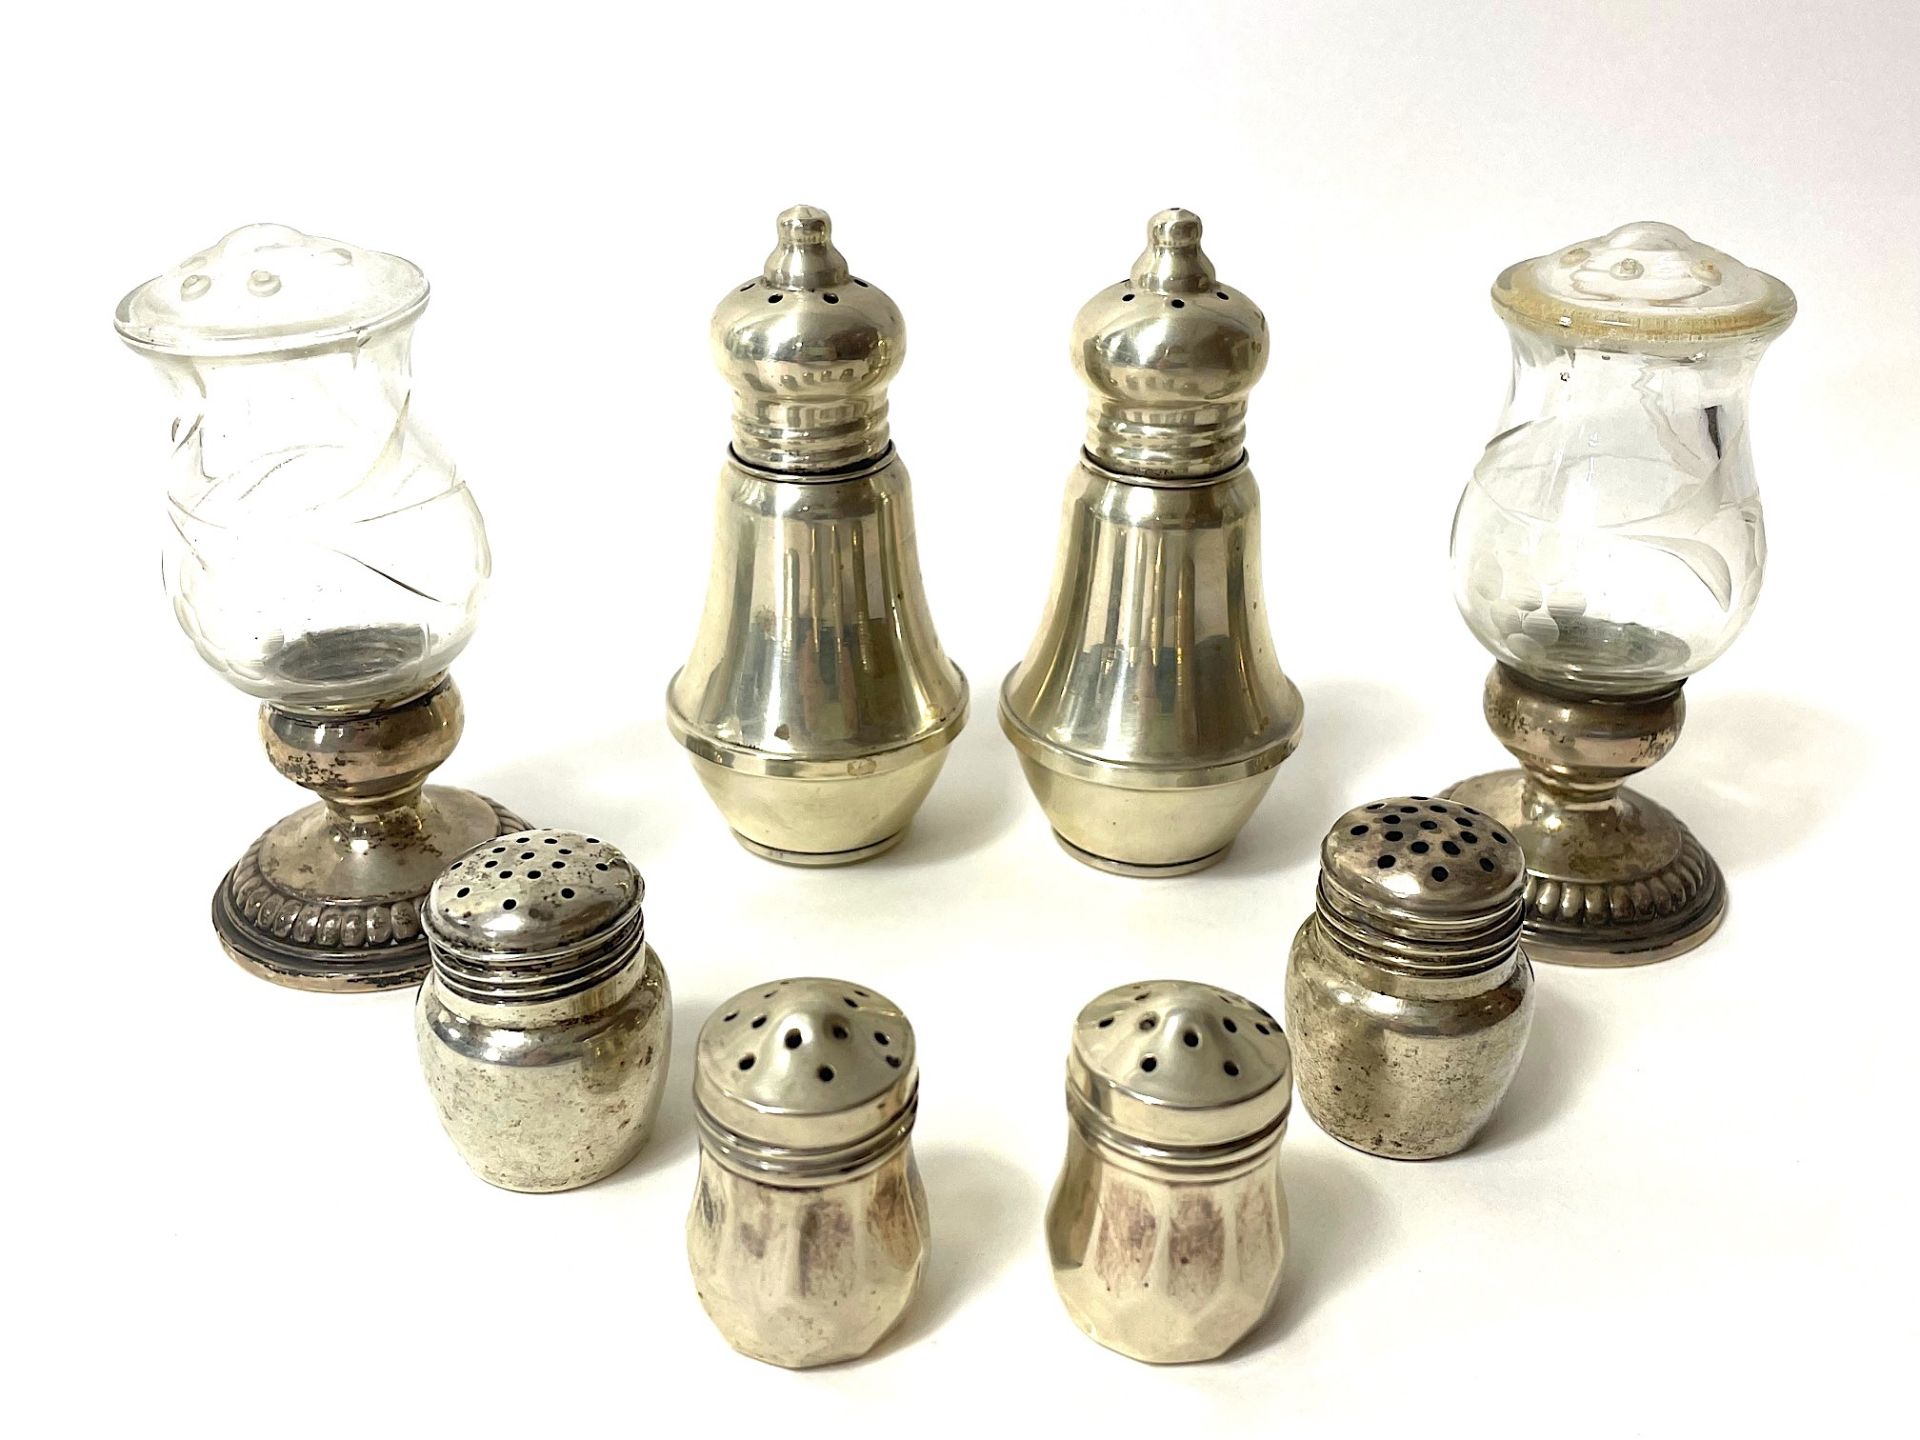 40 pairs of salt/pepper and spice shakers, - Image 15 of 88